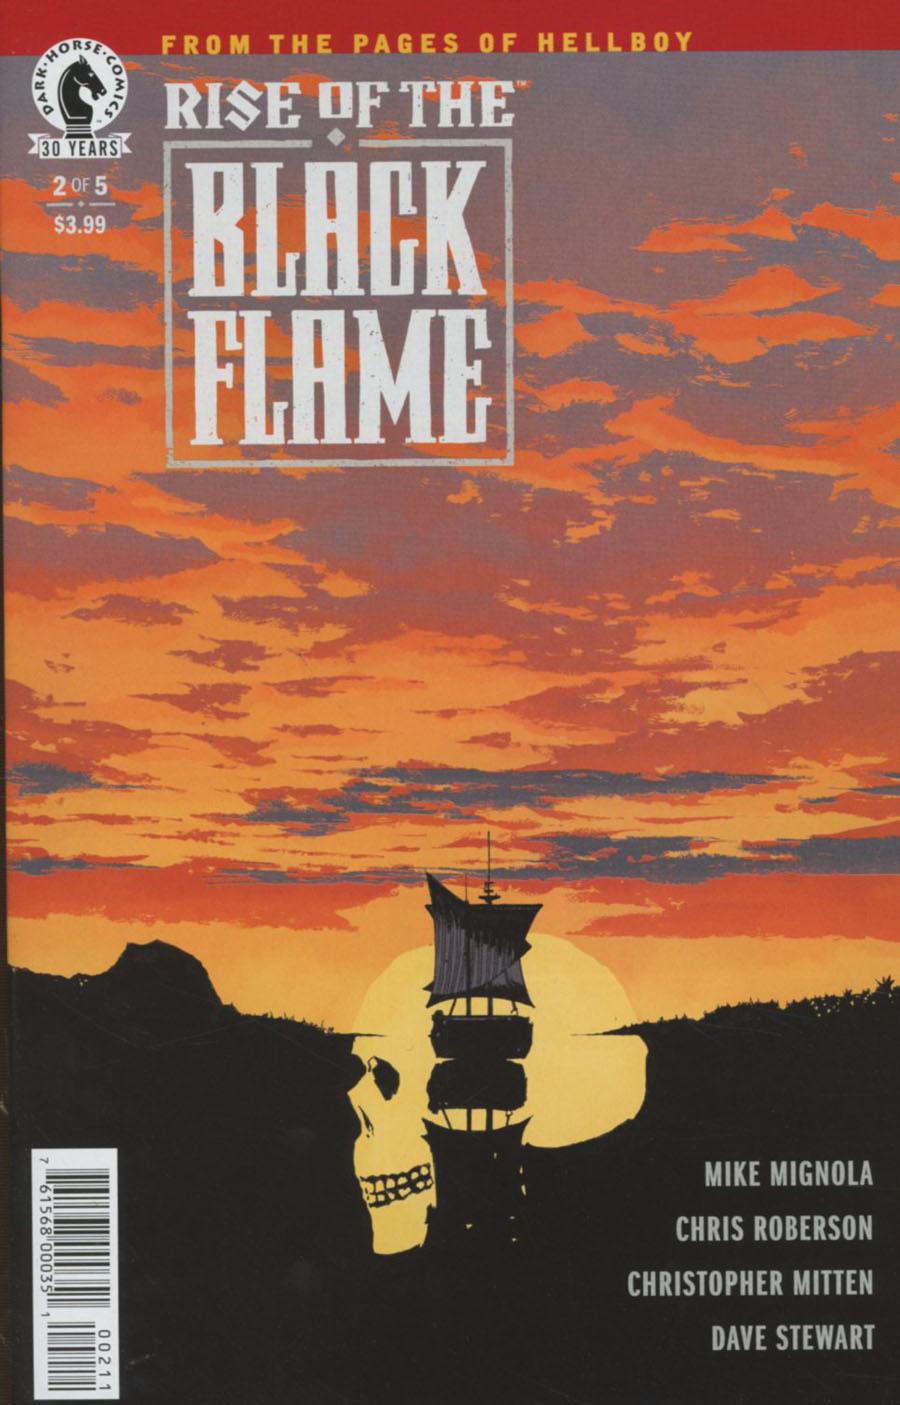 Rise Of The Black Flame Vol. 1 #2